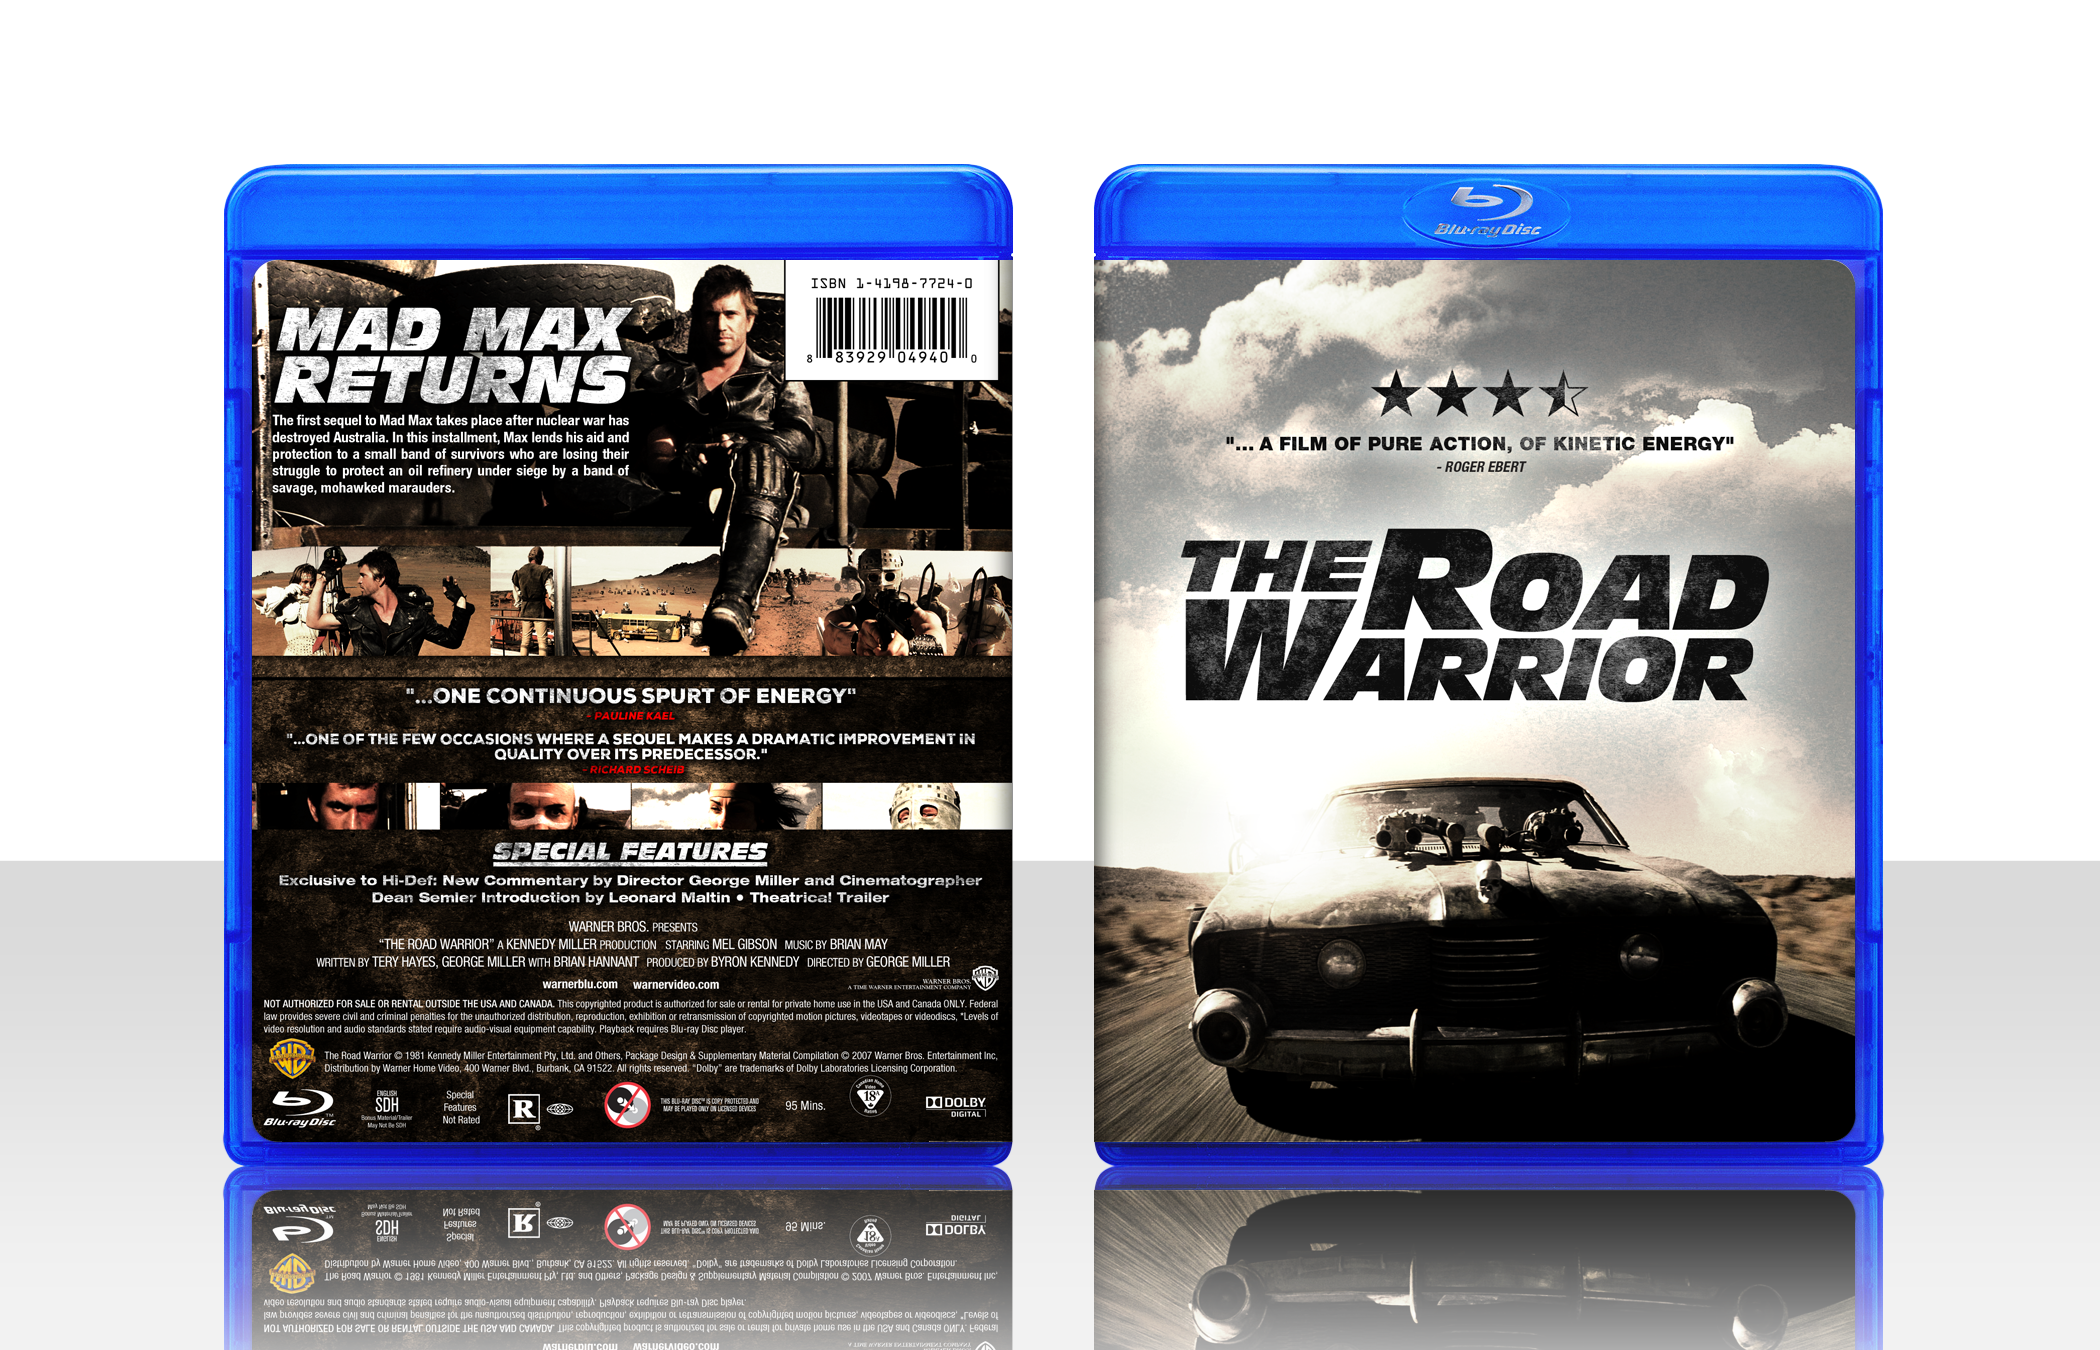 The Road Warrior box cover